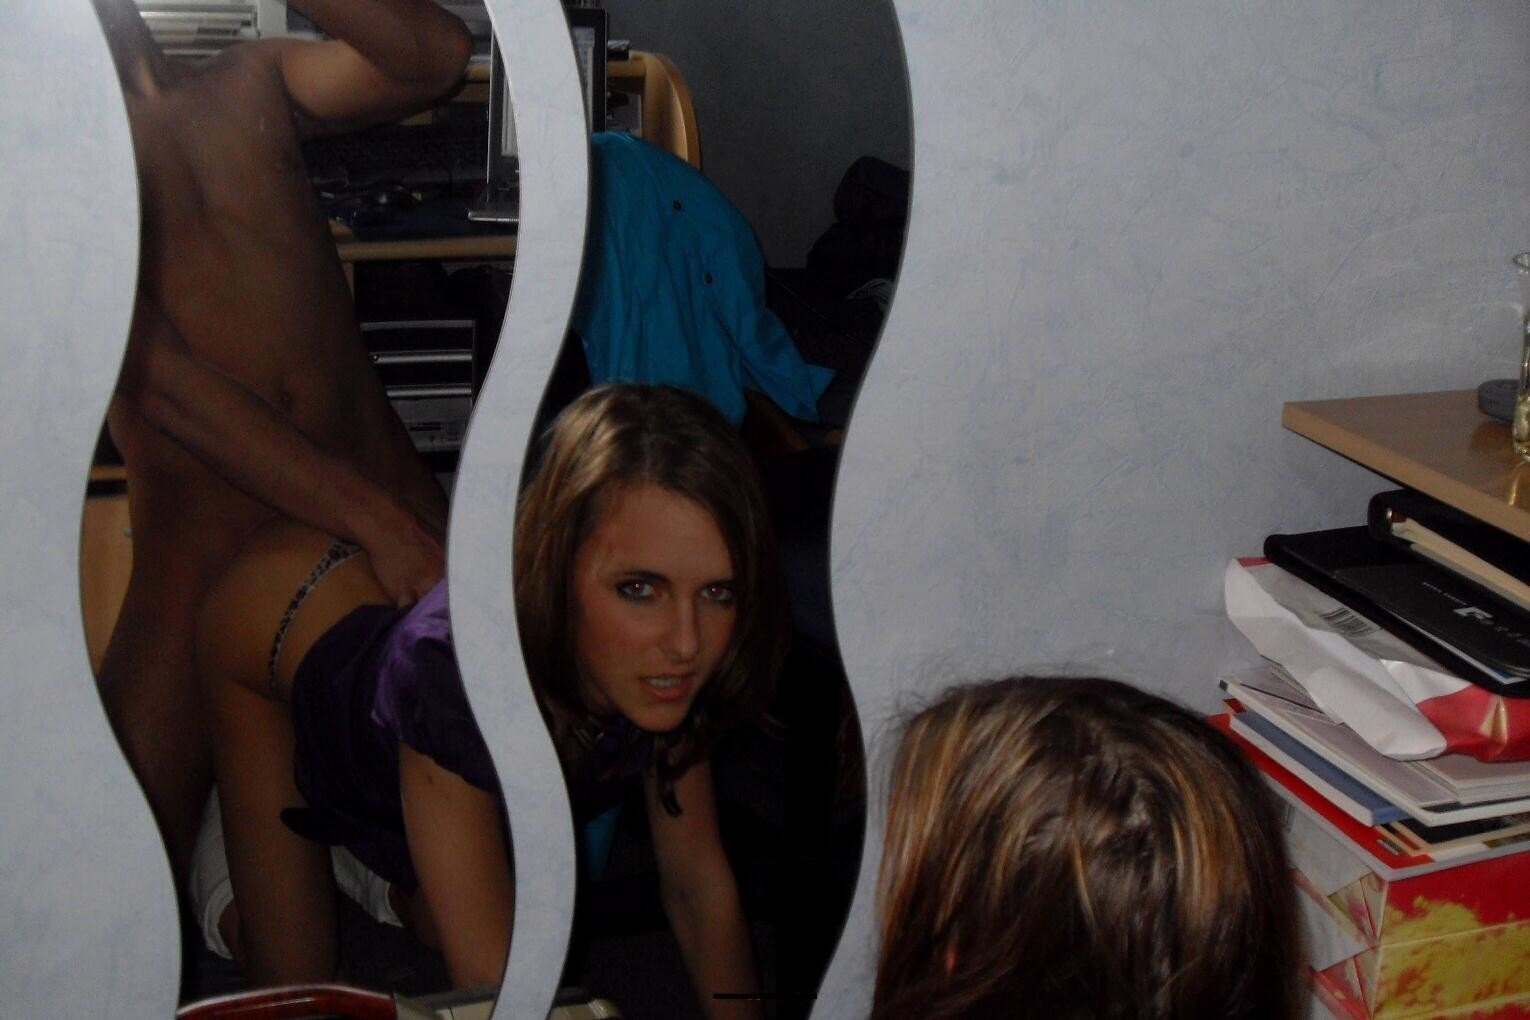 Amateurs having sex in the mirror